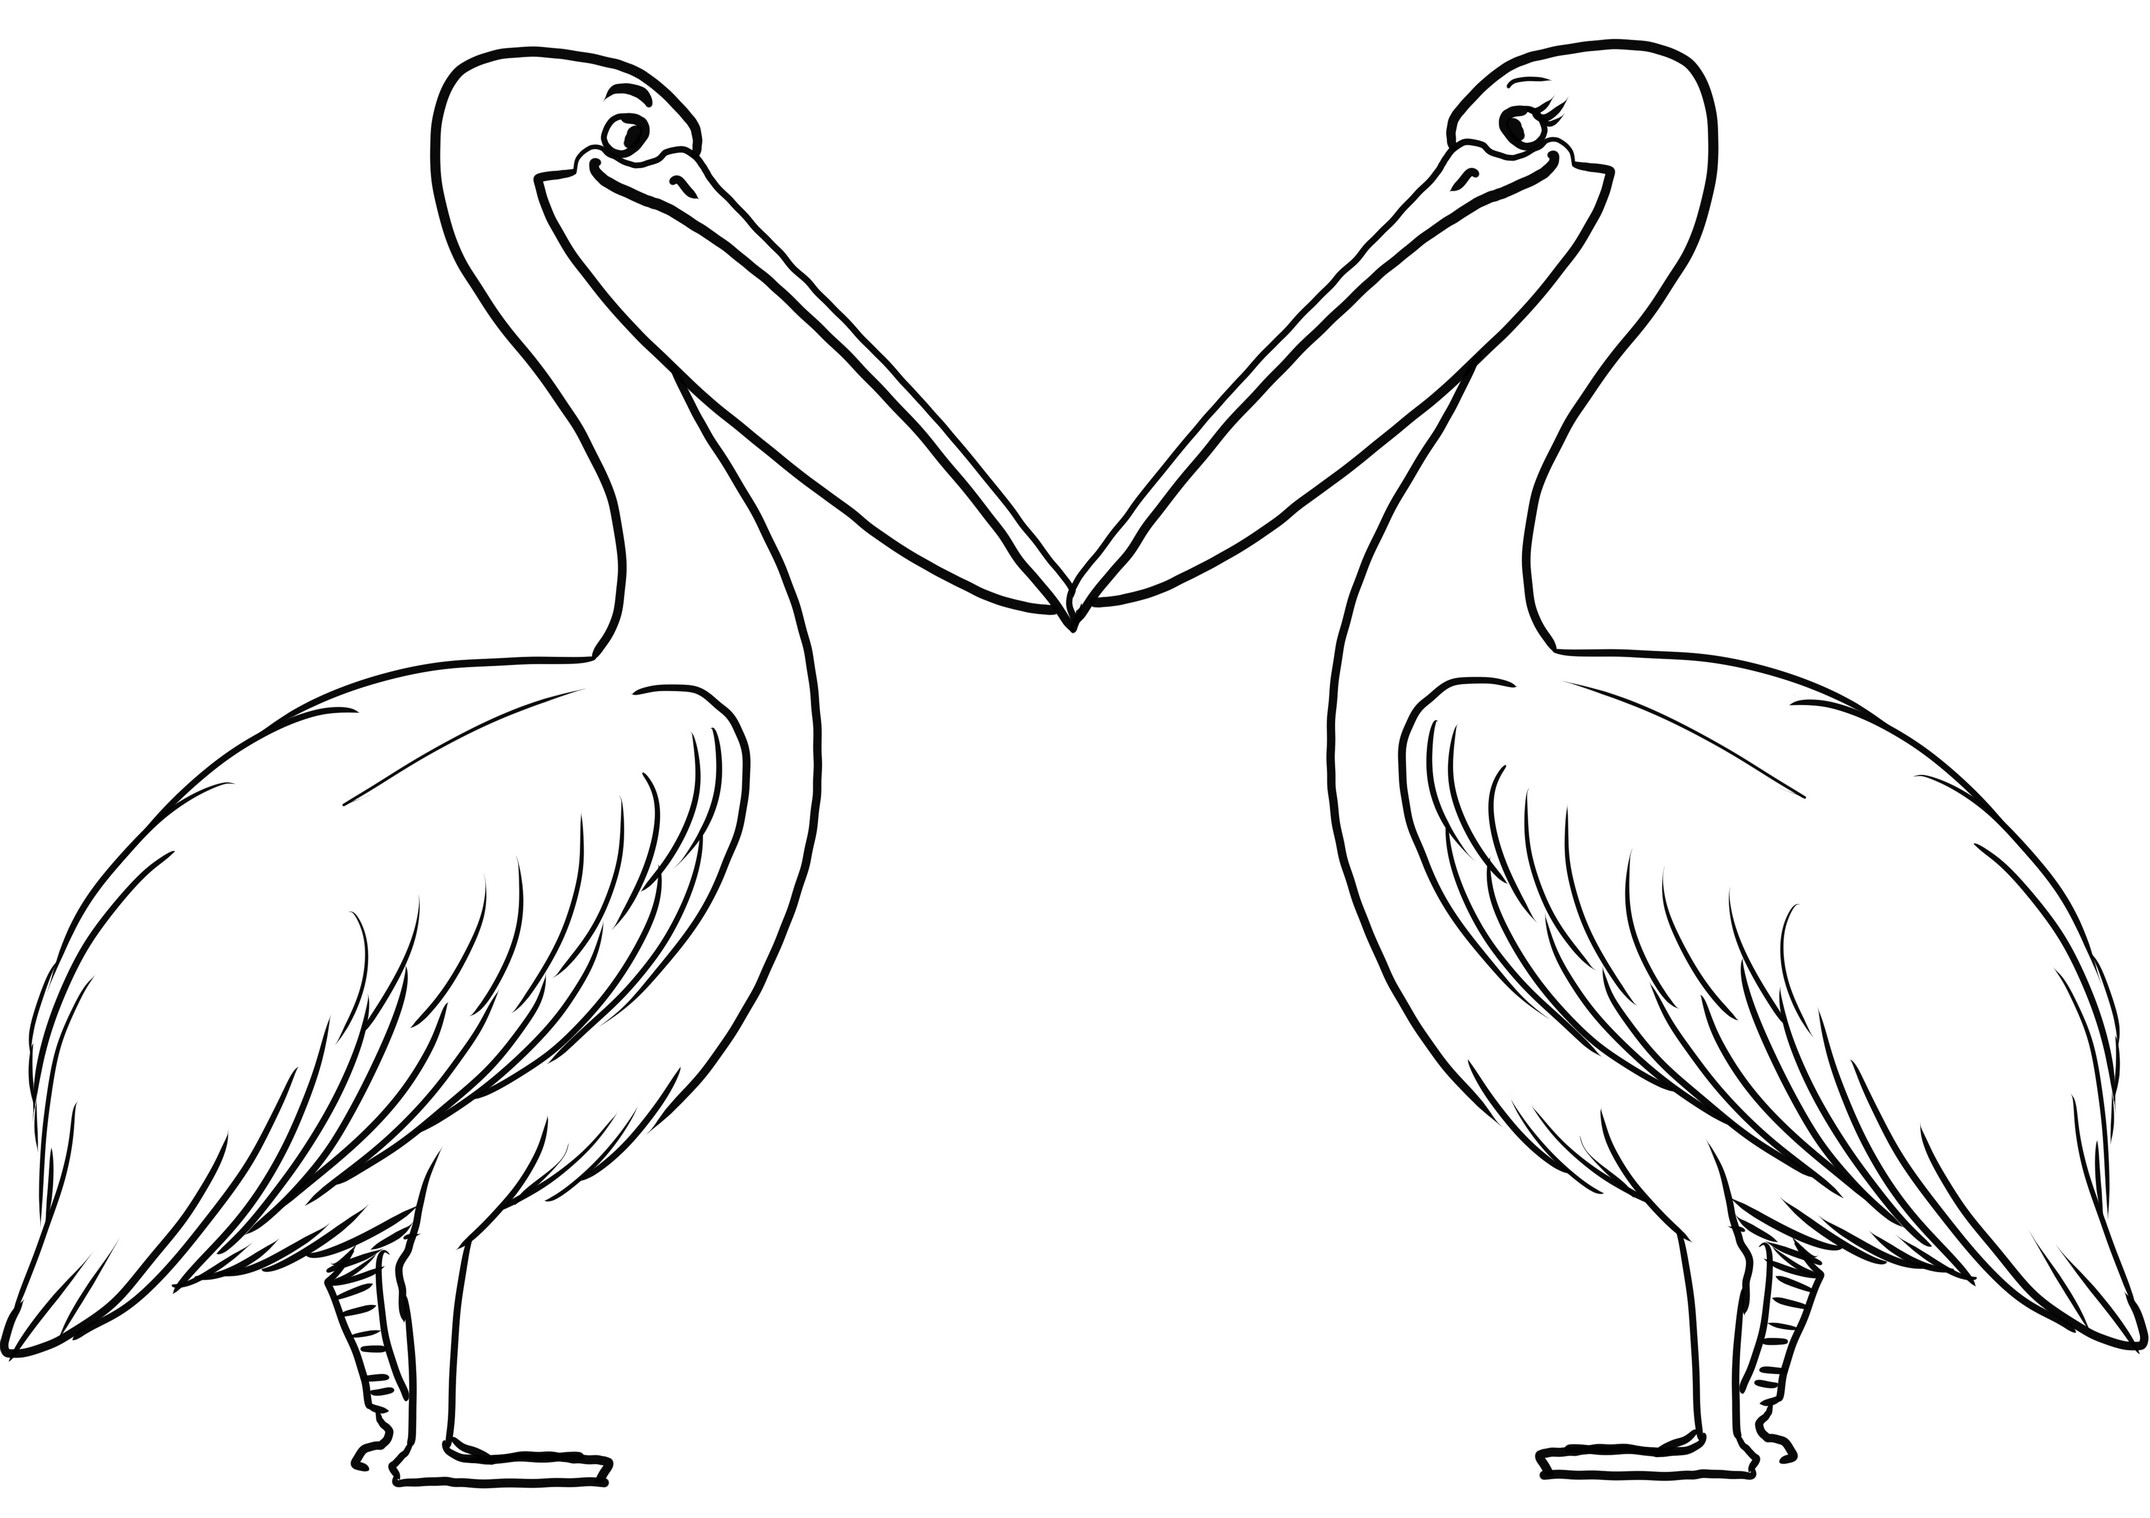 Coloring page of couple of pelicans in love